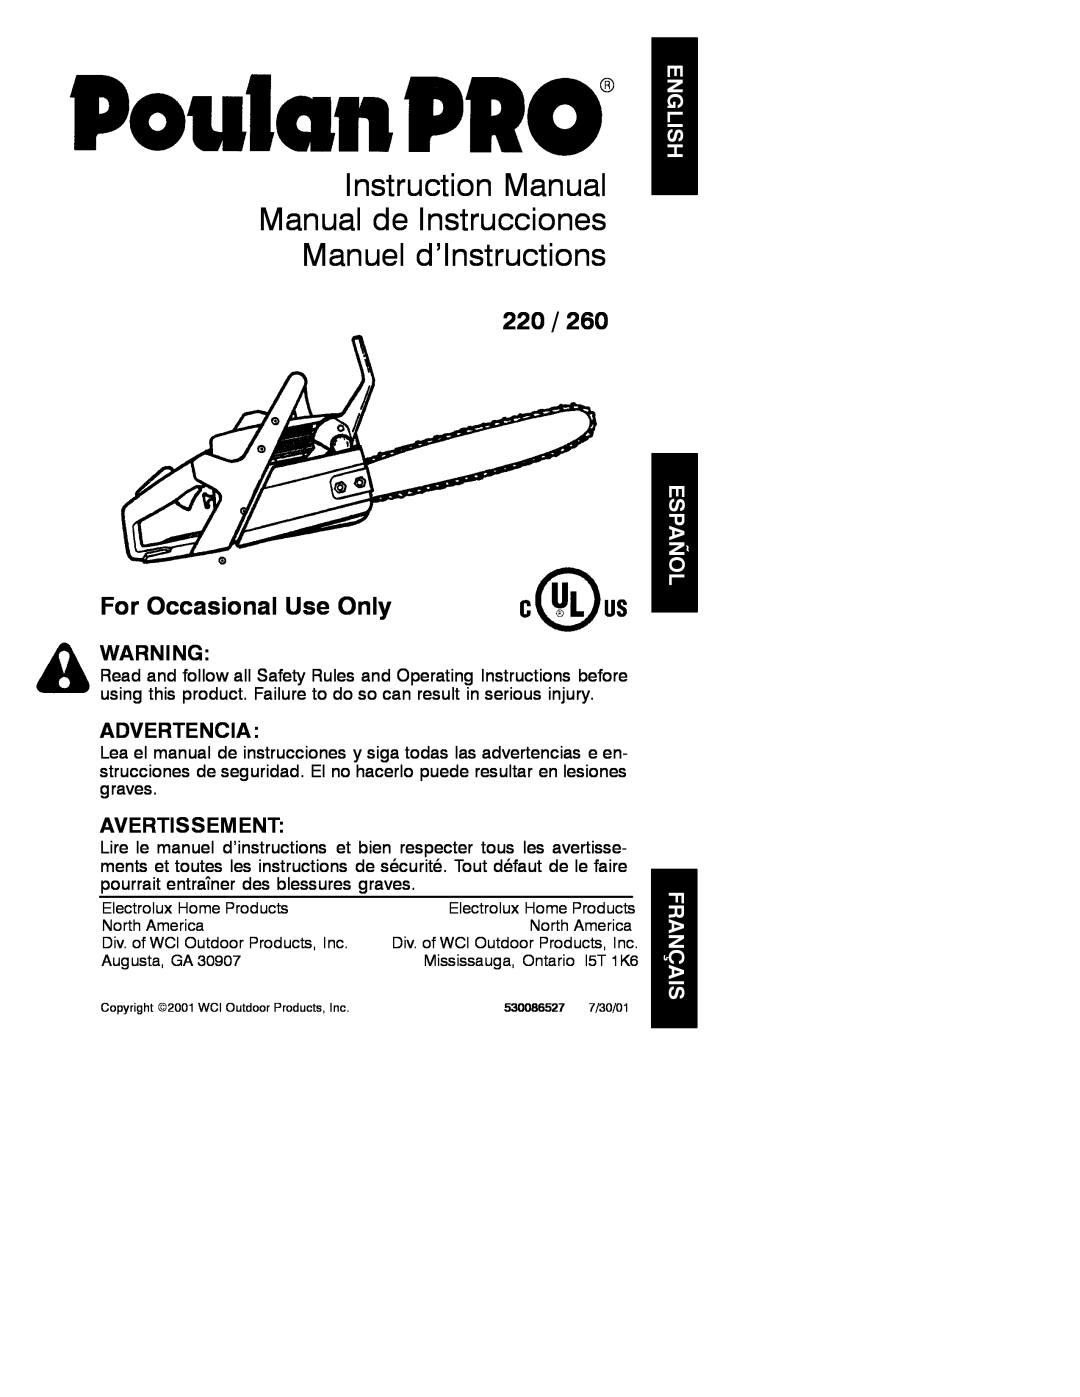 Poulan 530086527 instruction manual For Occasional Use Only, Advertencia, Avertissement 